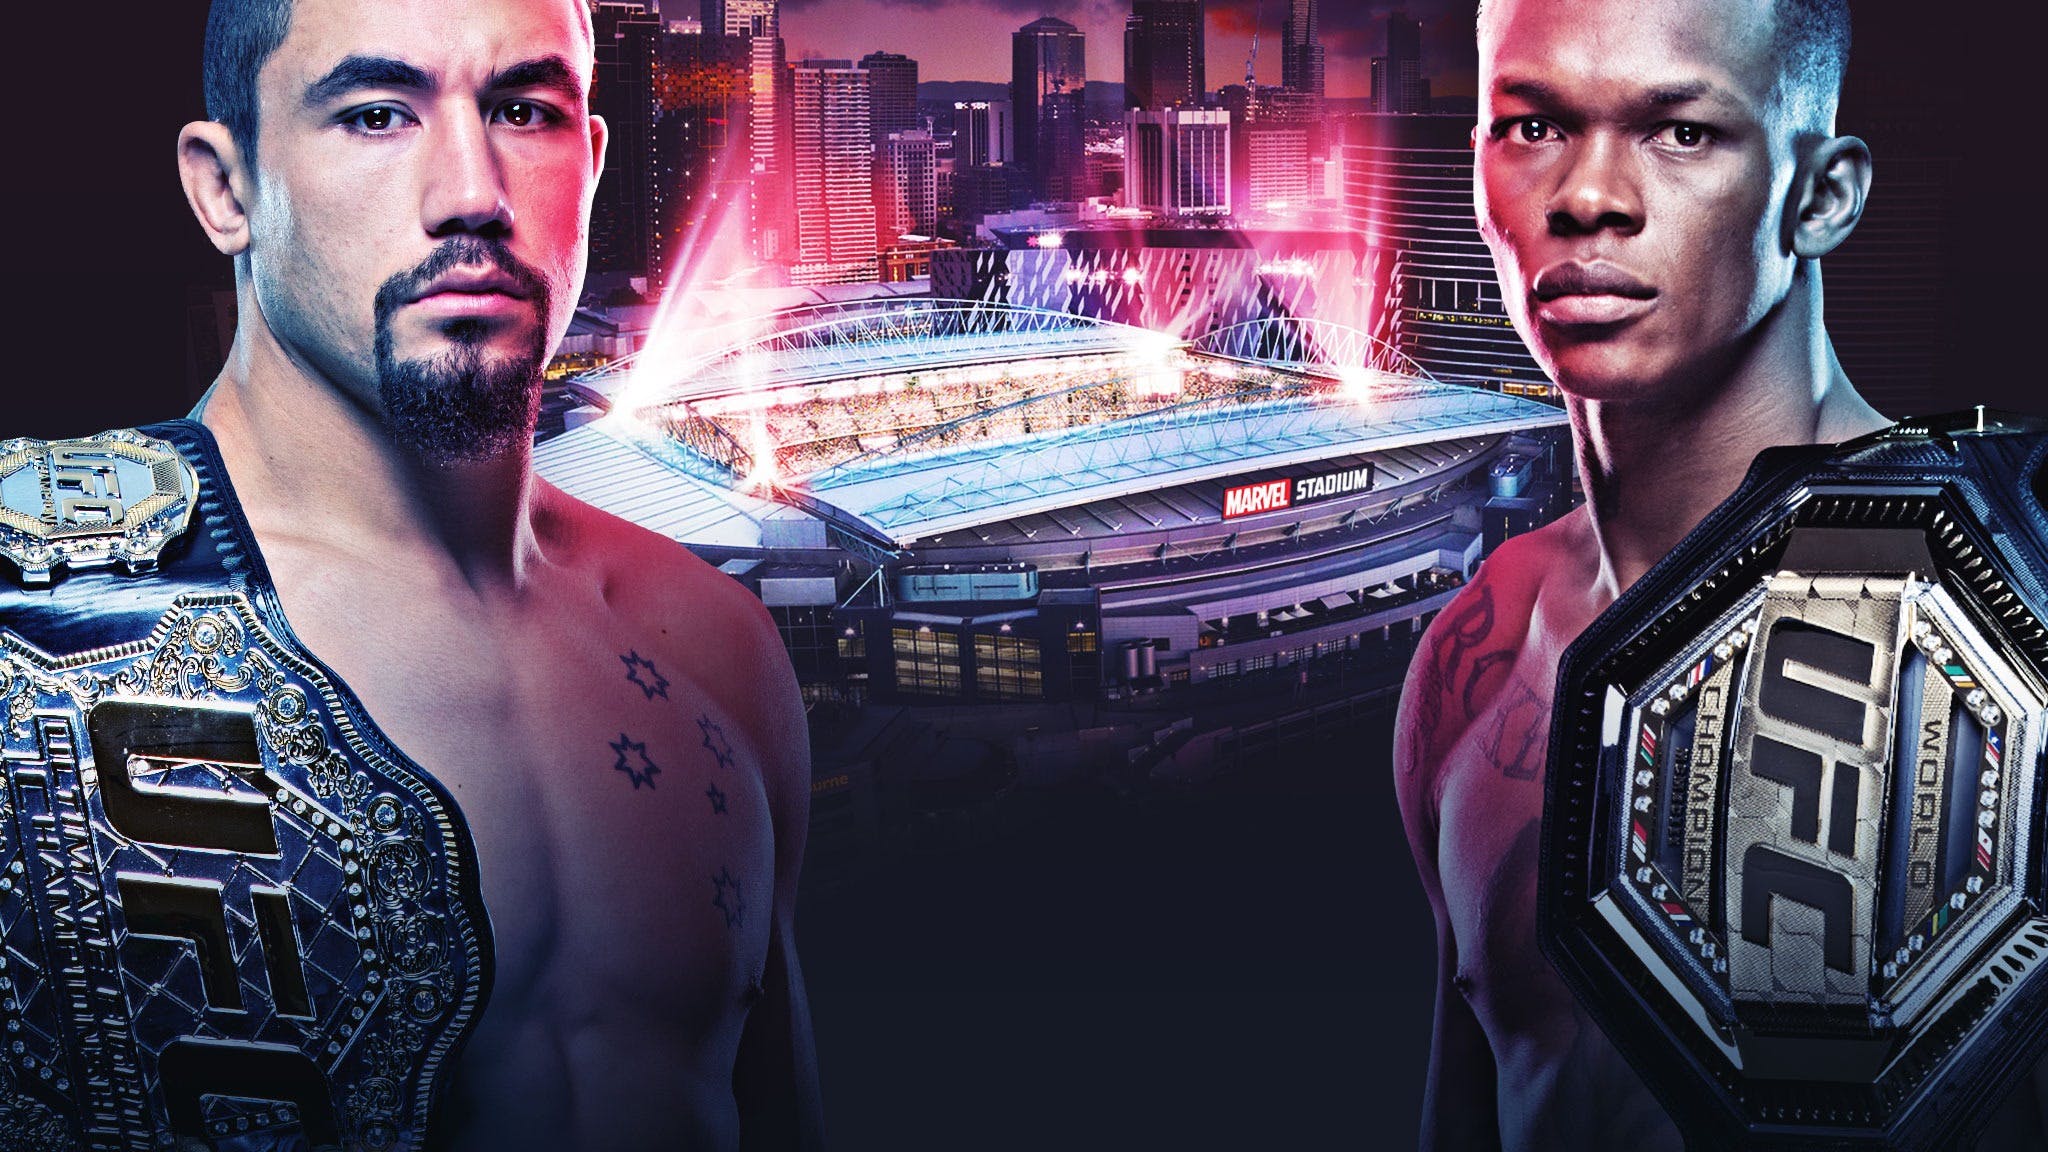 UFC 243 Whittaker vs Adesanya Complete Card and Winning Odds
